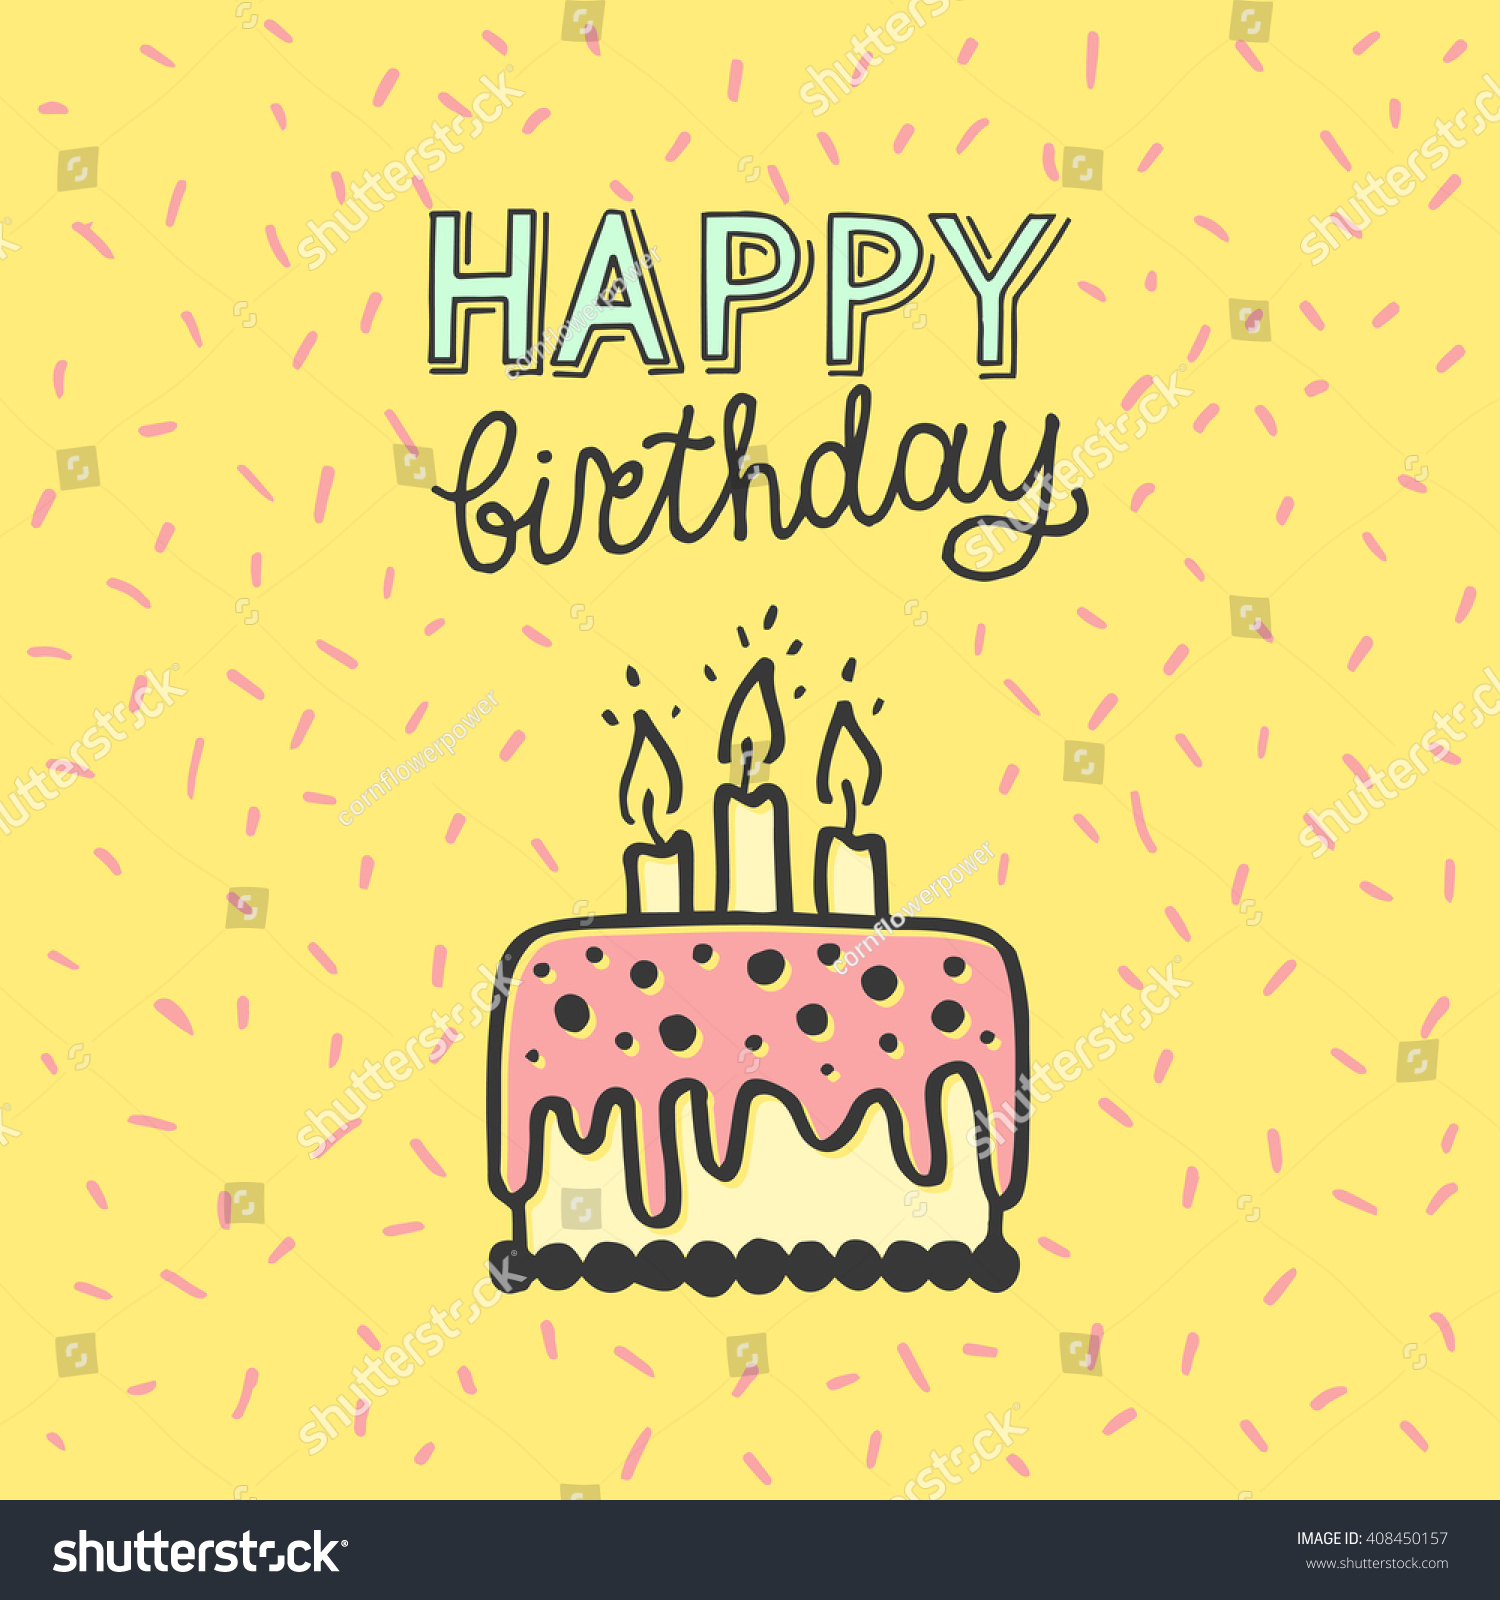 Cute happy birthday card or invitation with cake - Royalty Free Stock ...